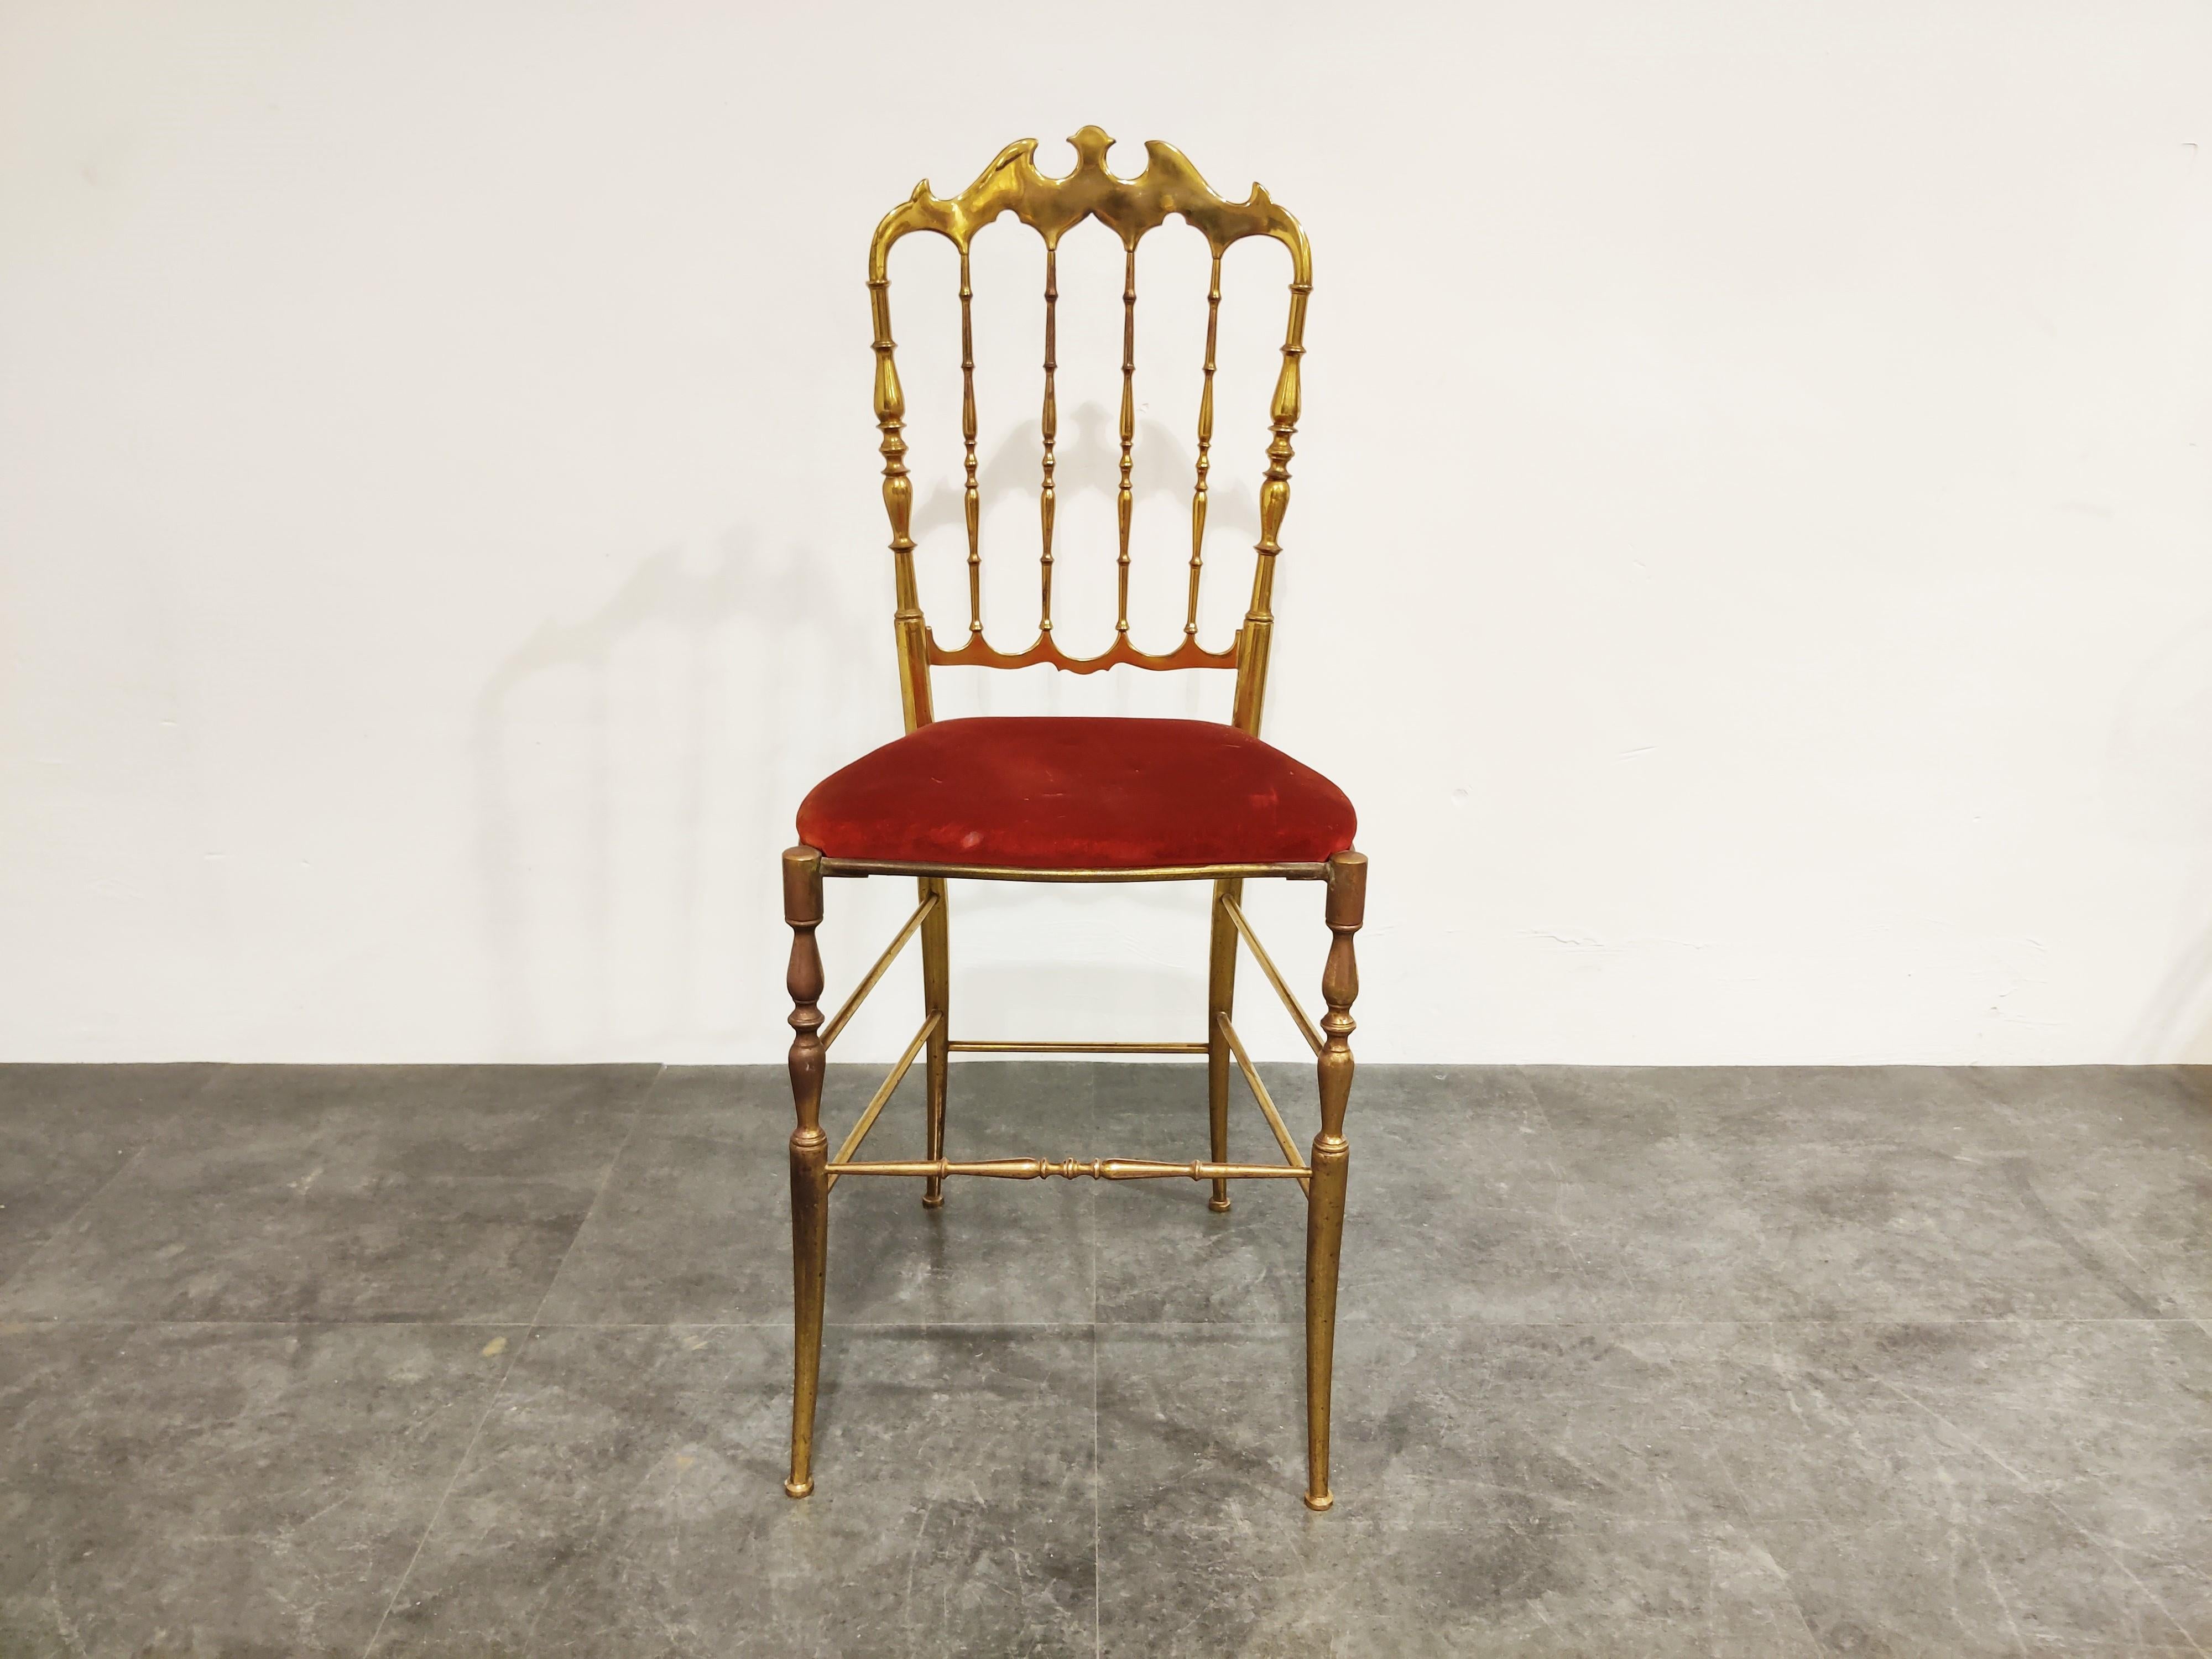 Beautiful and elegant Chiavari chair in polished brass and a red velvet seat.

Designed by Giuseppe Gaetano Descalzi and produced since the early 19th century in the Ligurian town of Chiavari, Italy.

This chair can be used for a desk, as